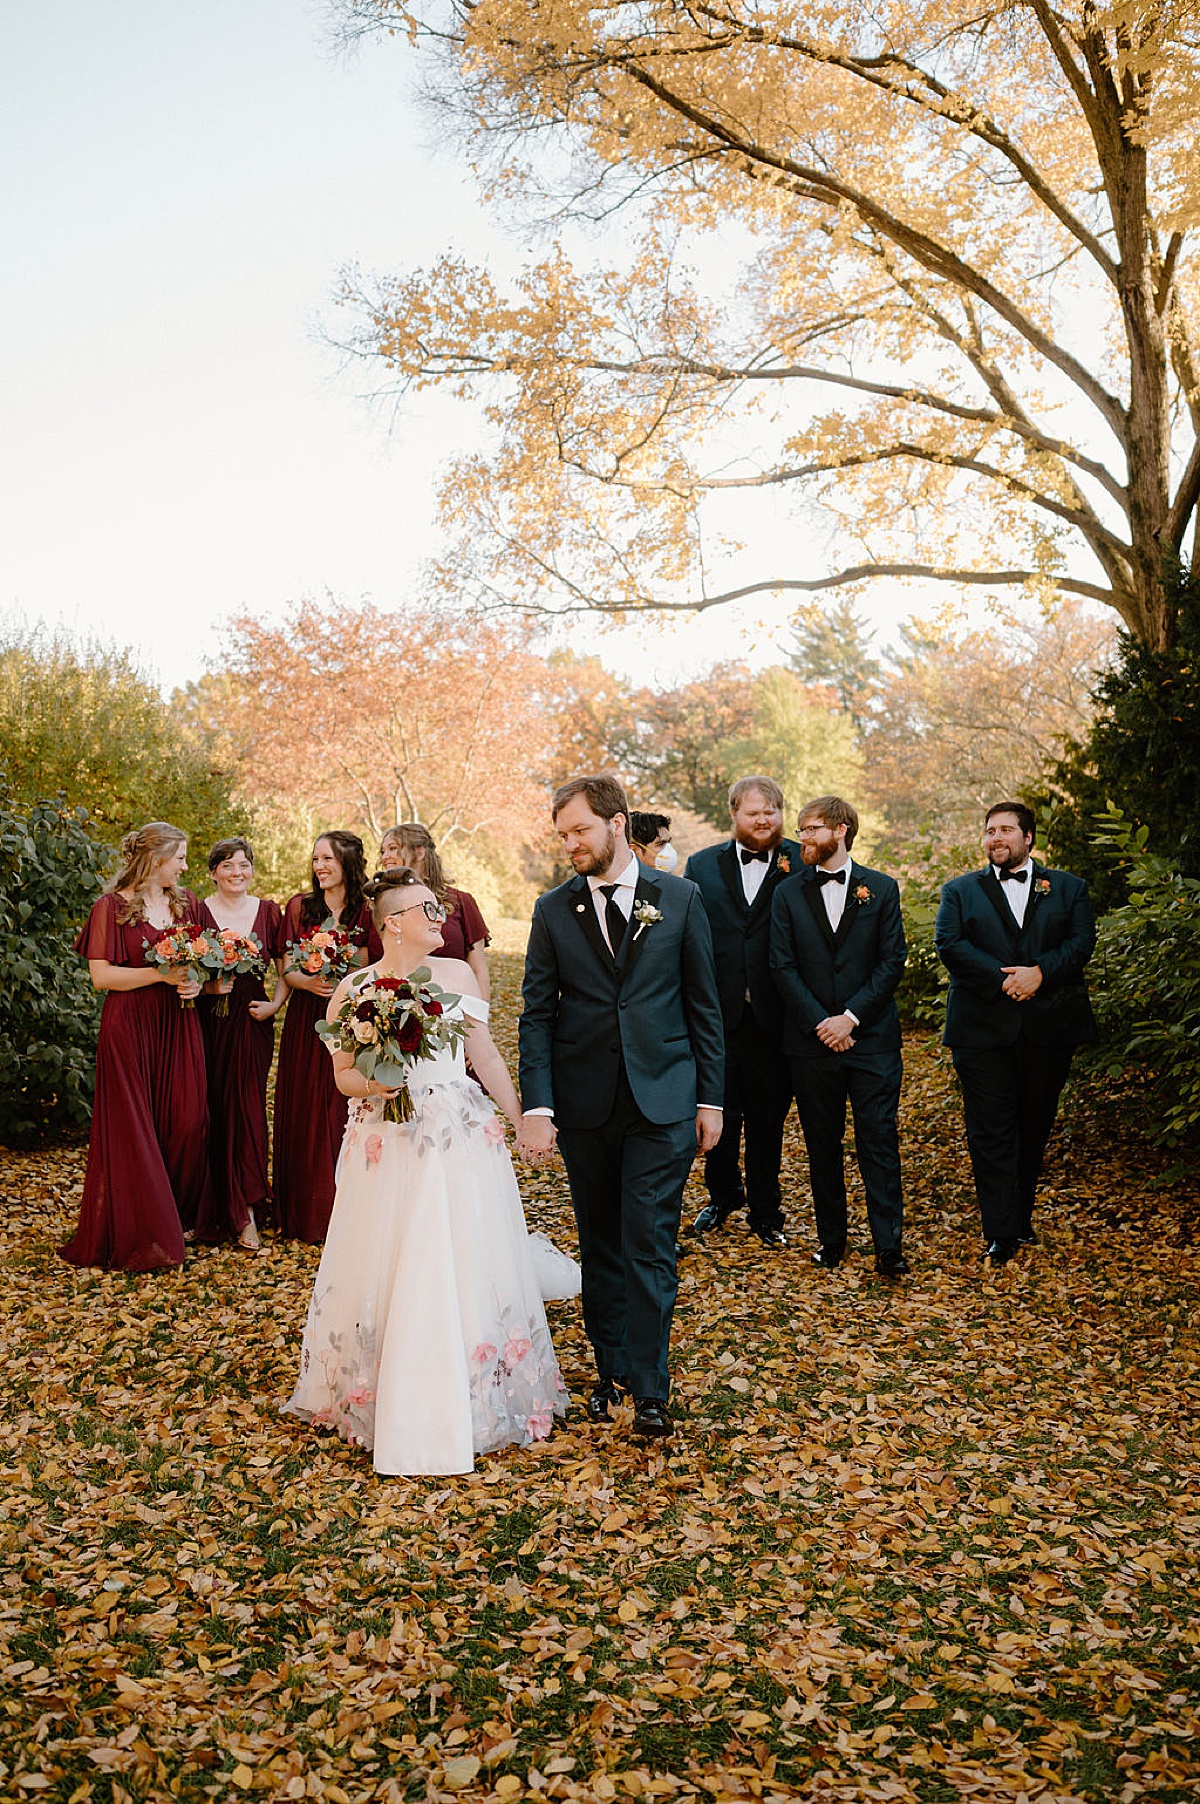 wedding party in burgundy and midnight blue walk behind bride and groom during shoot with Indigo Lace Collective